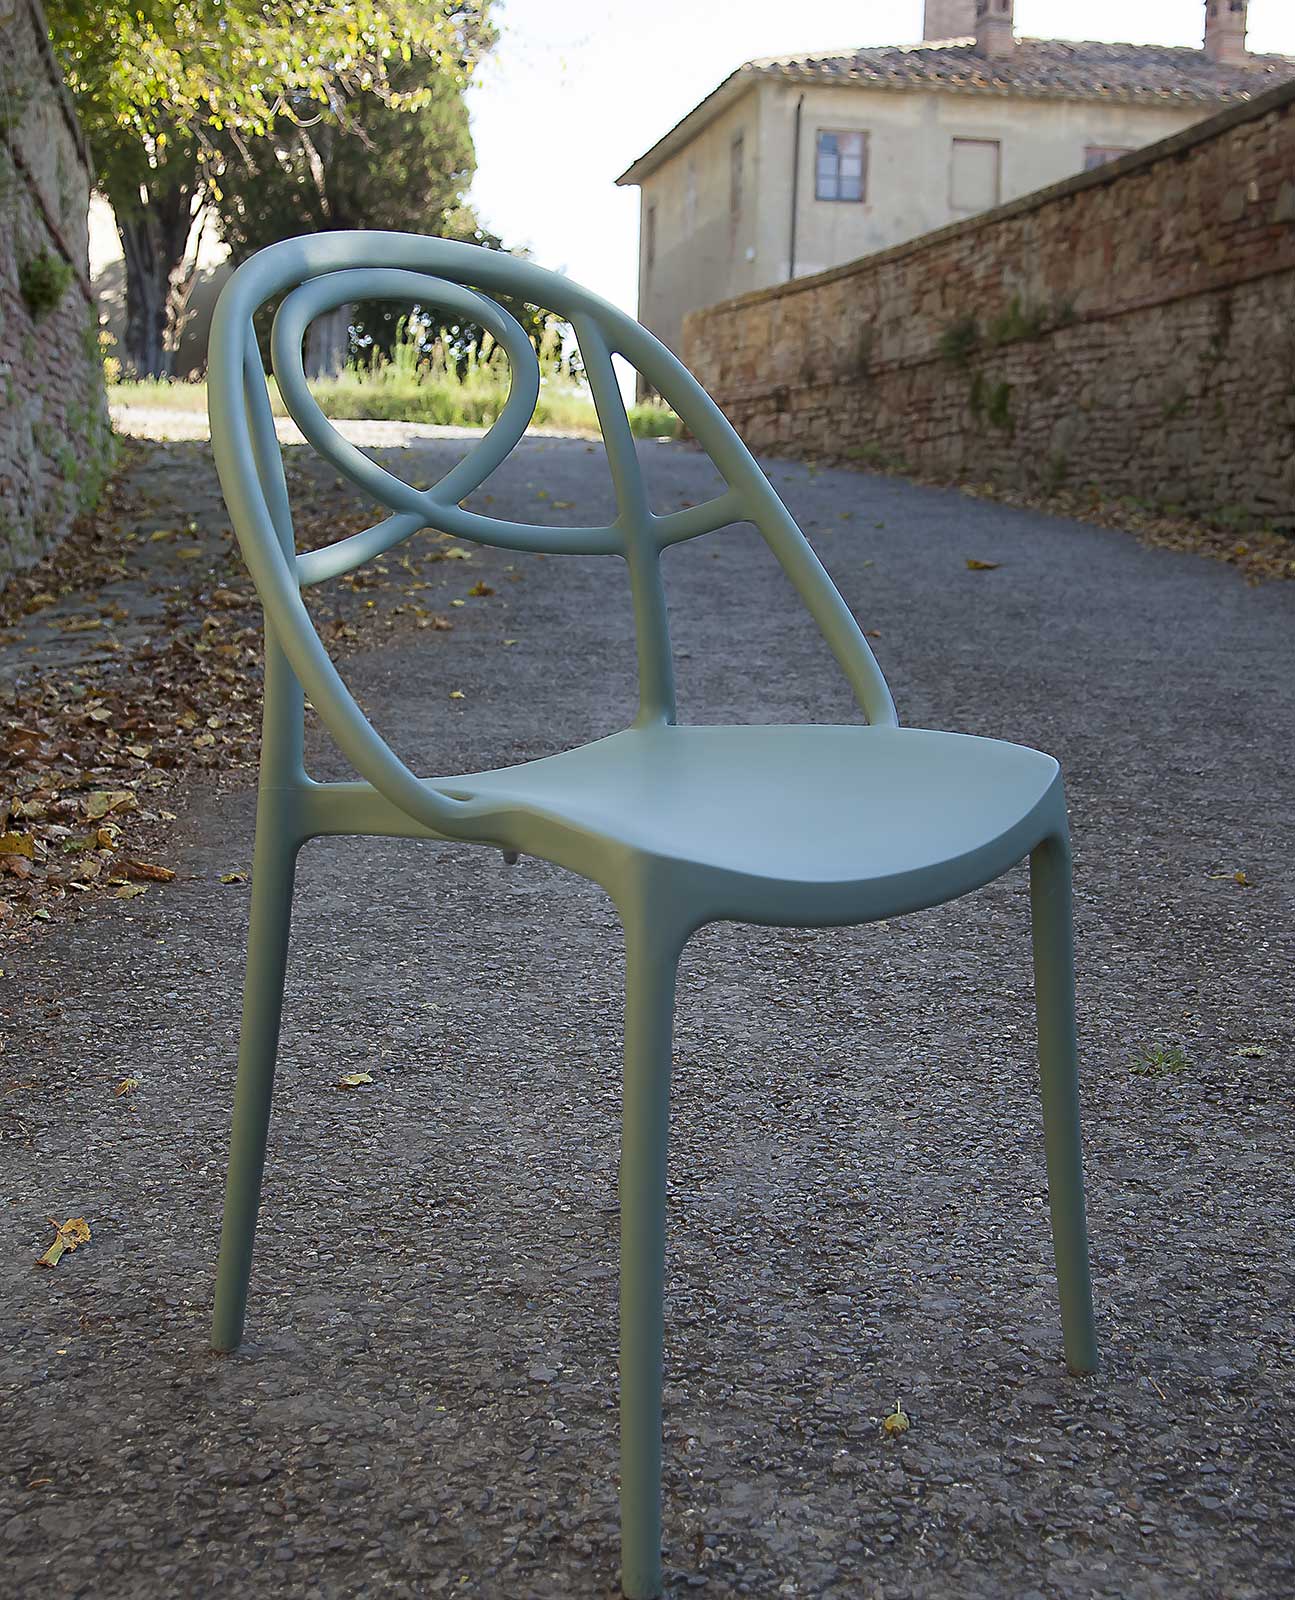 Arabesque is a polypropylene chair entirely handcrafted in Italy. This handcrafted polypropylene chair is perfect for any home, office or outdoor space.